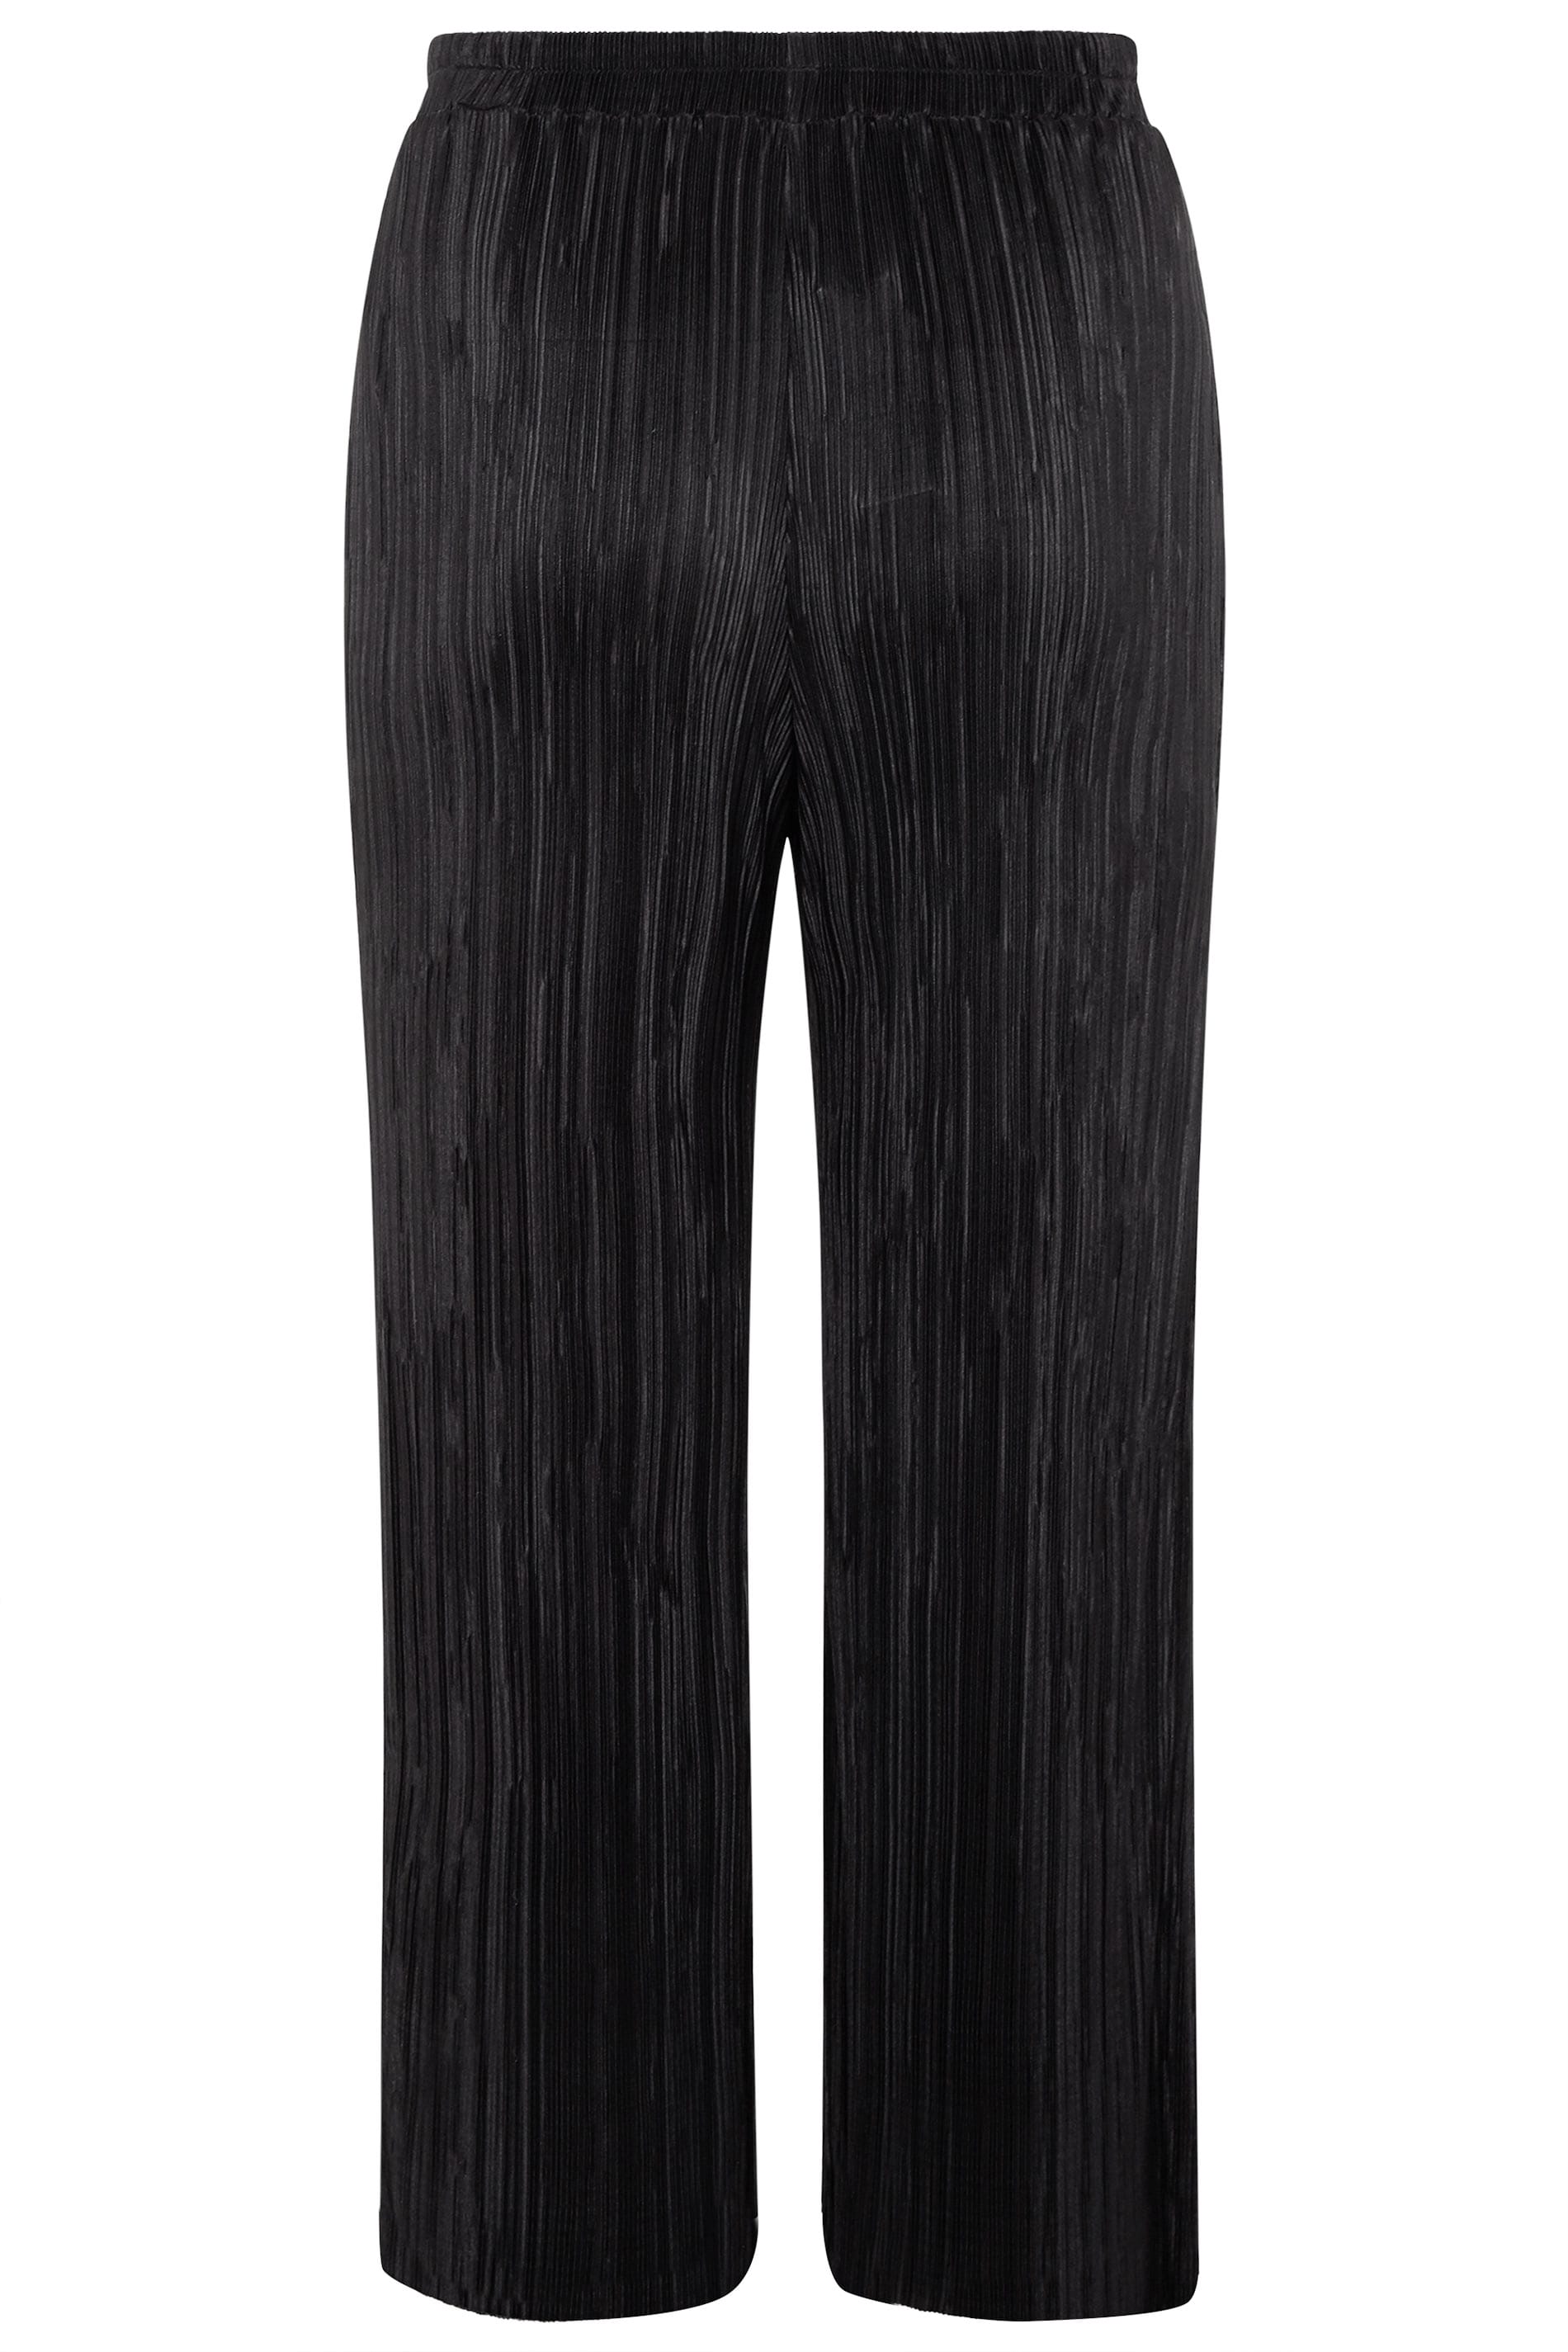 Black Plisse Wide Leg Trousers | Yours Clothing